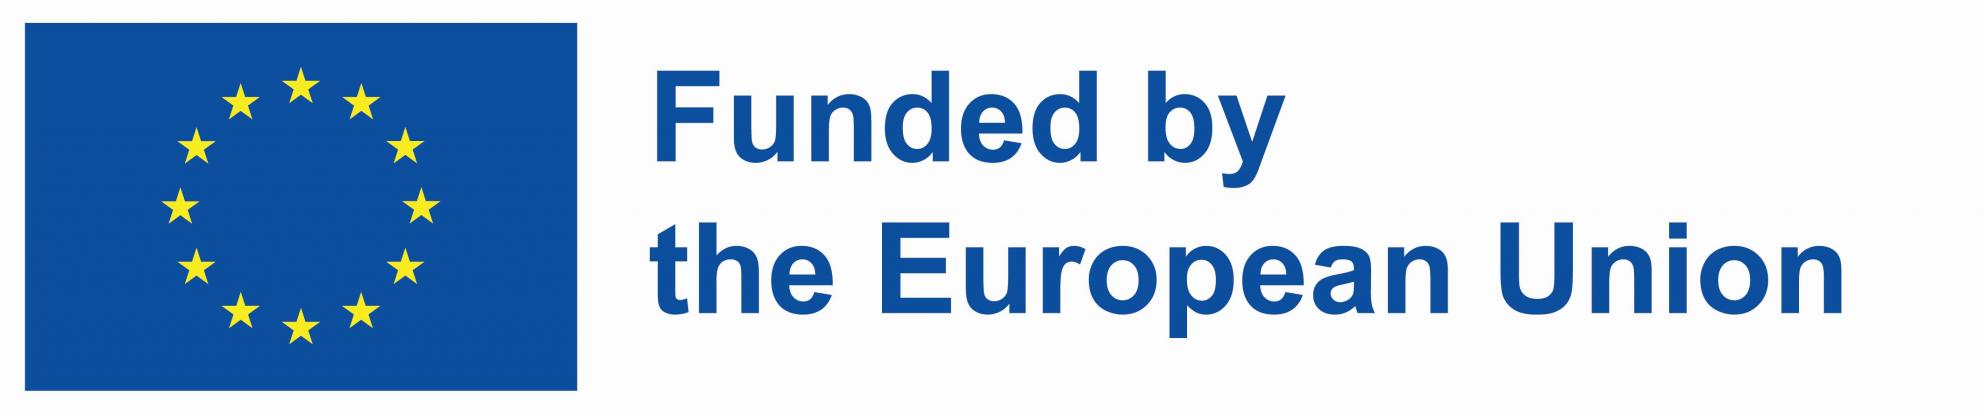 EN-Funded-by-the-EU-POS